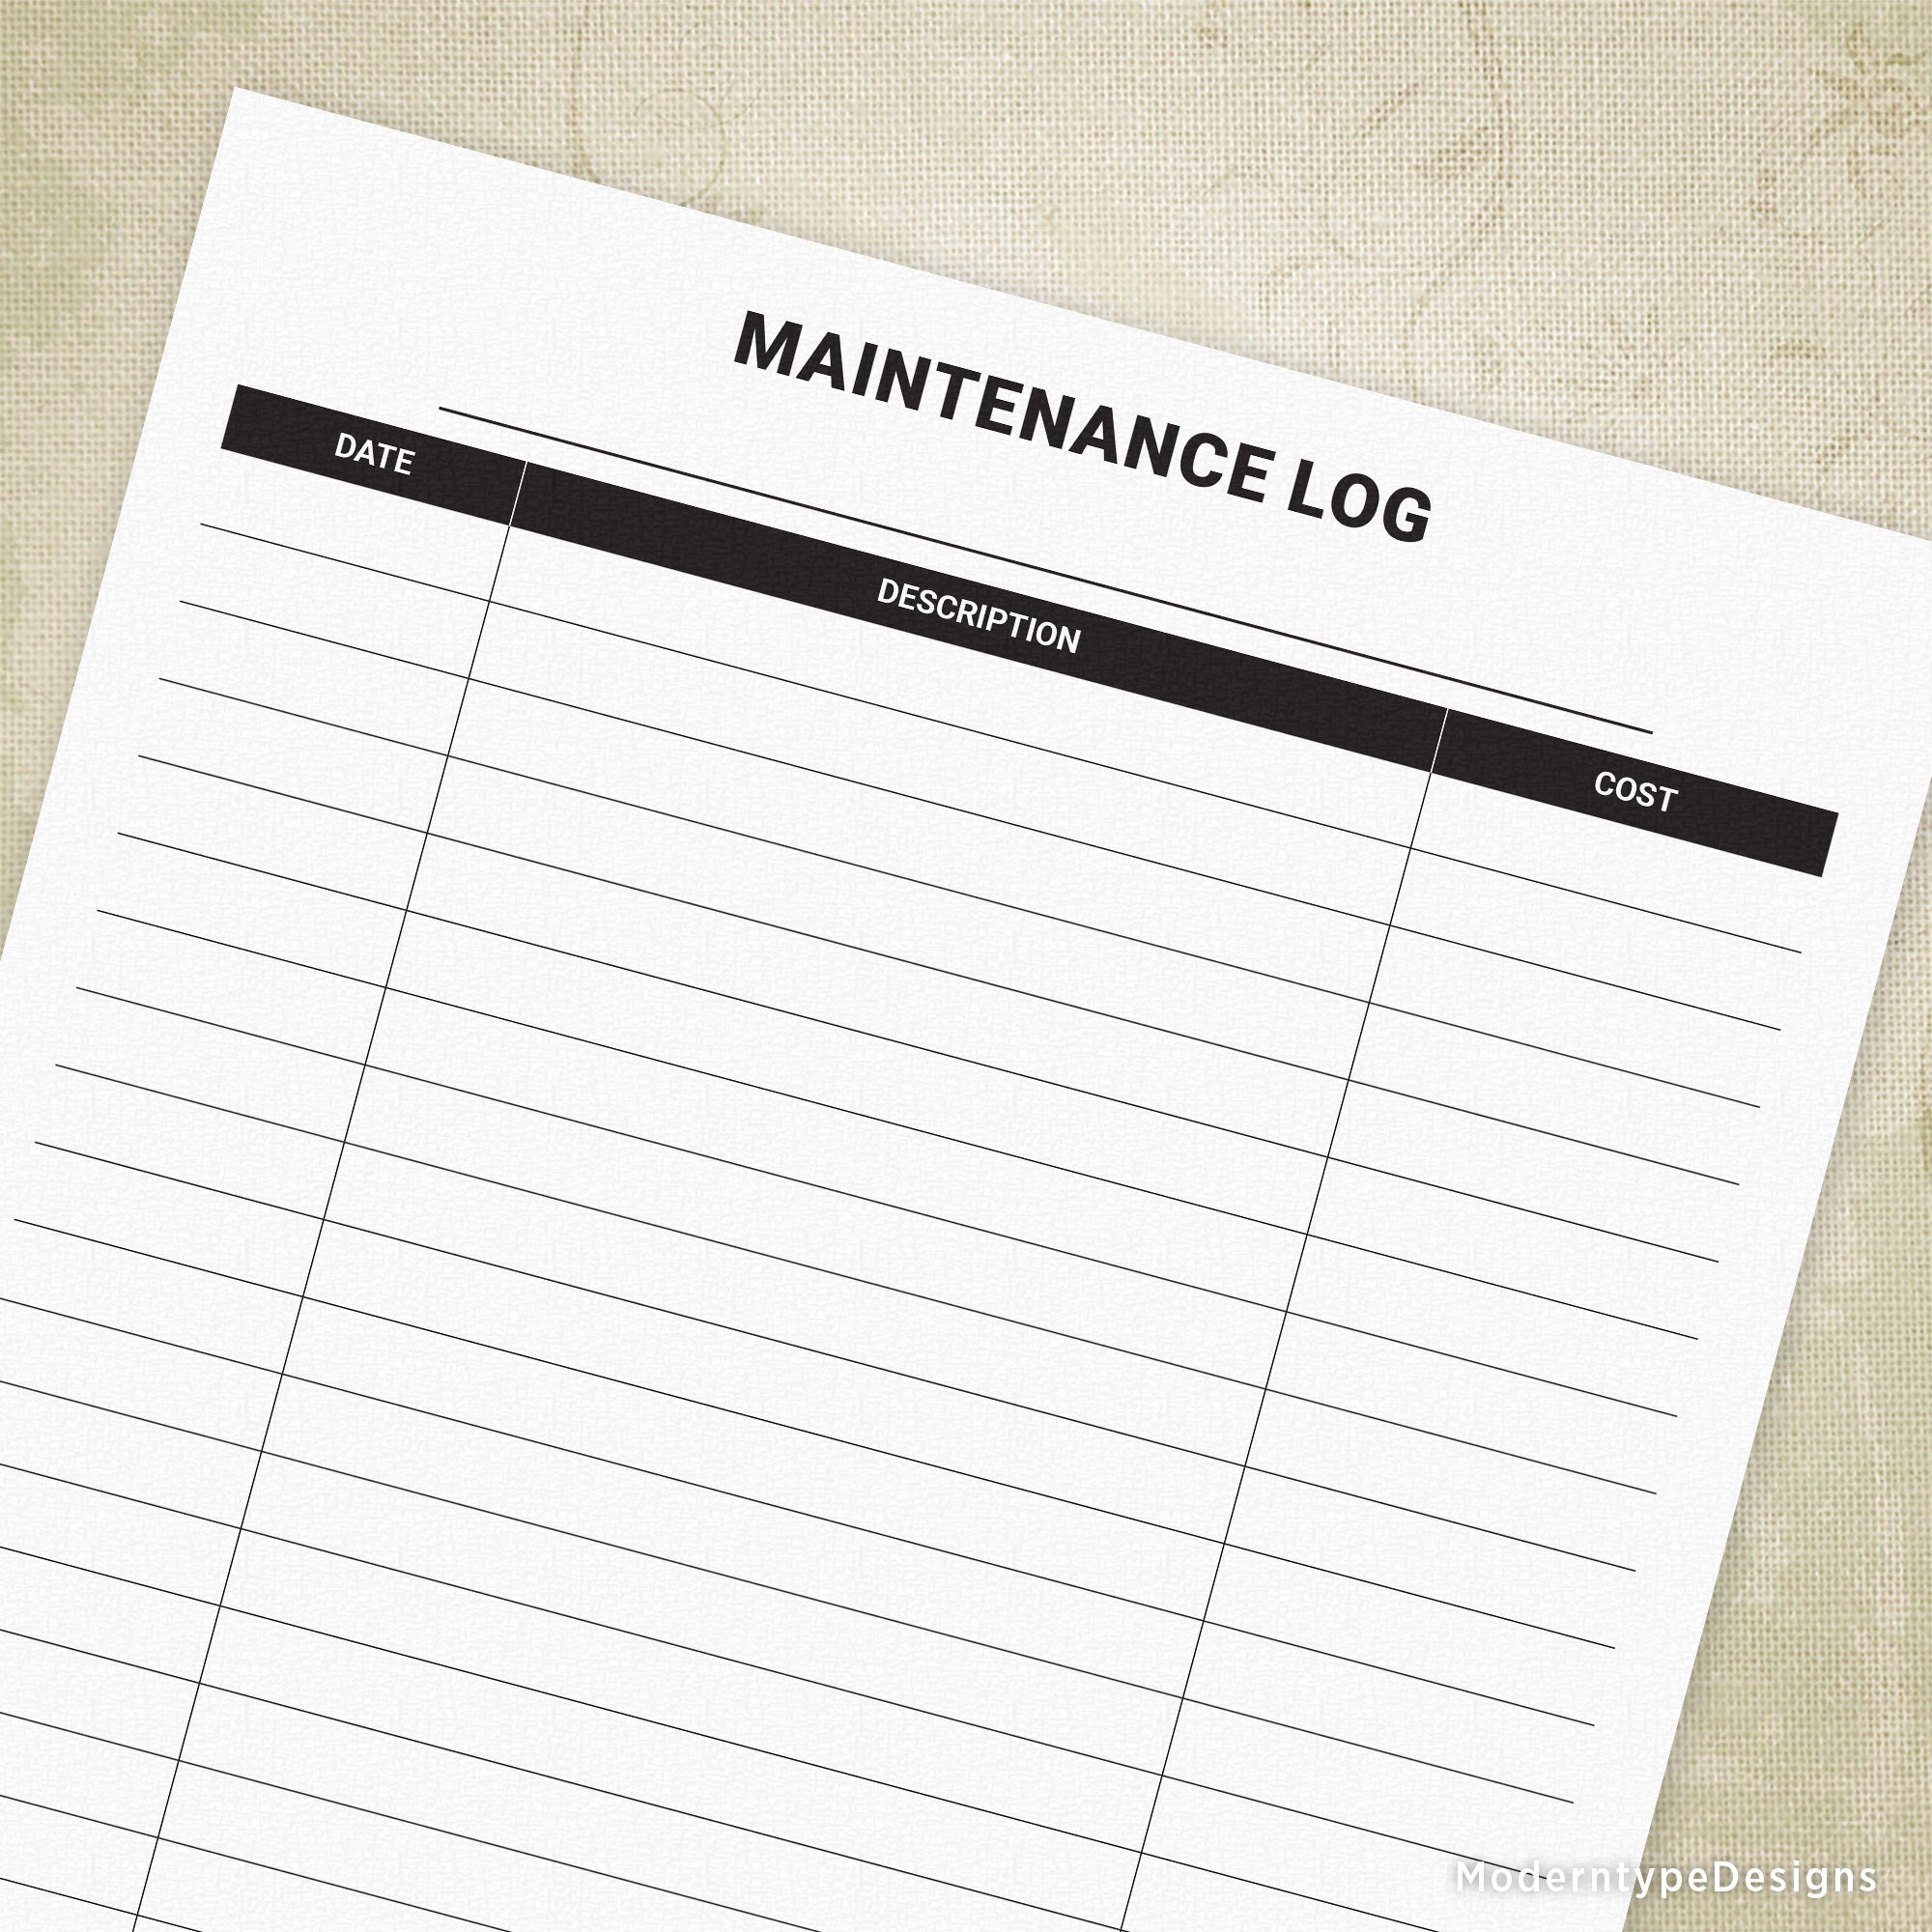 Maintenance Log for the Home or Office Printable